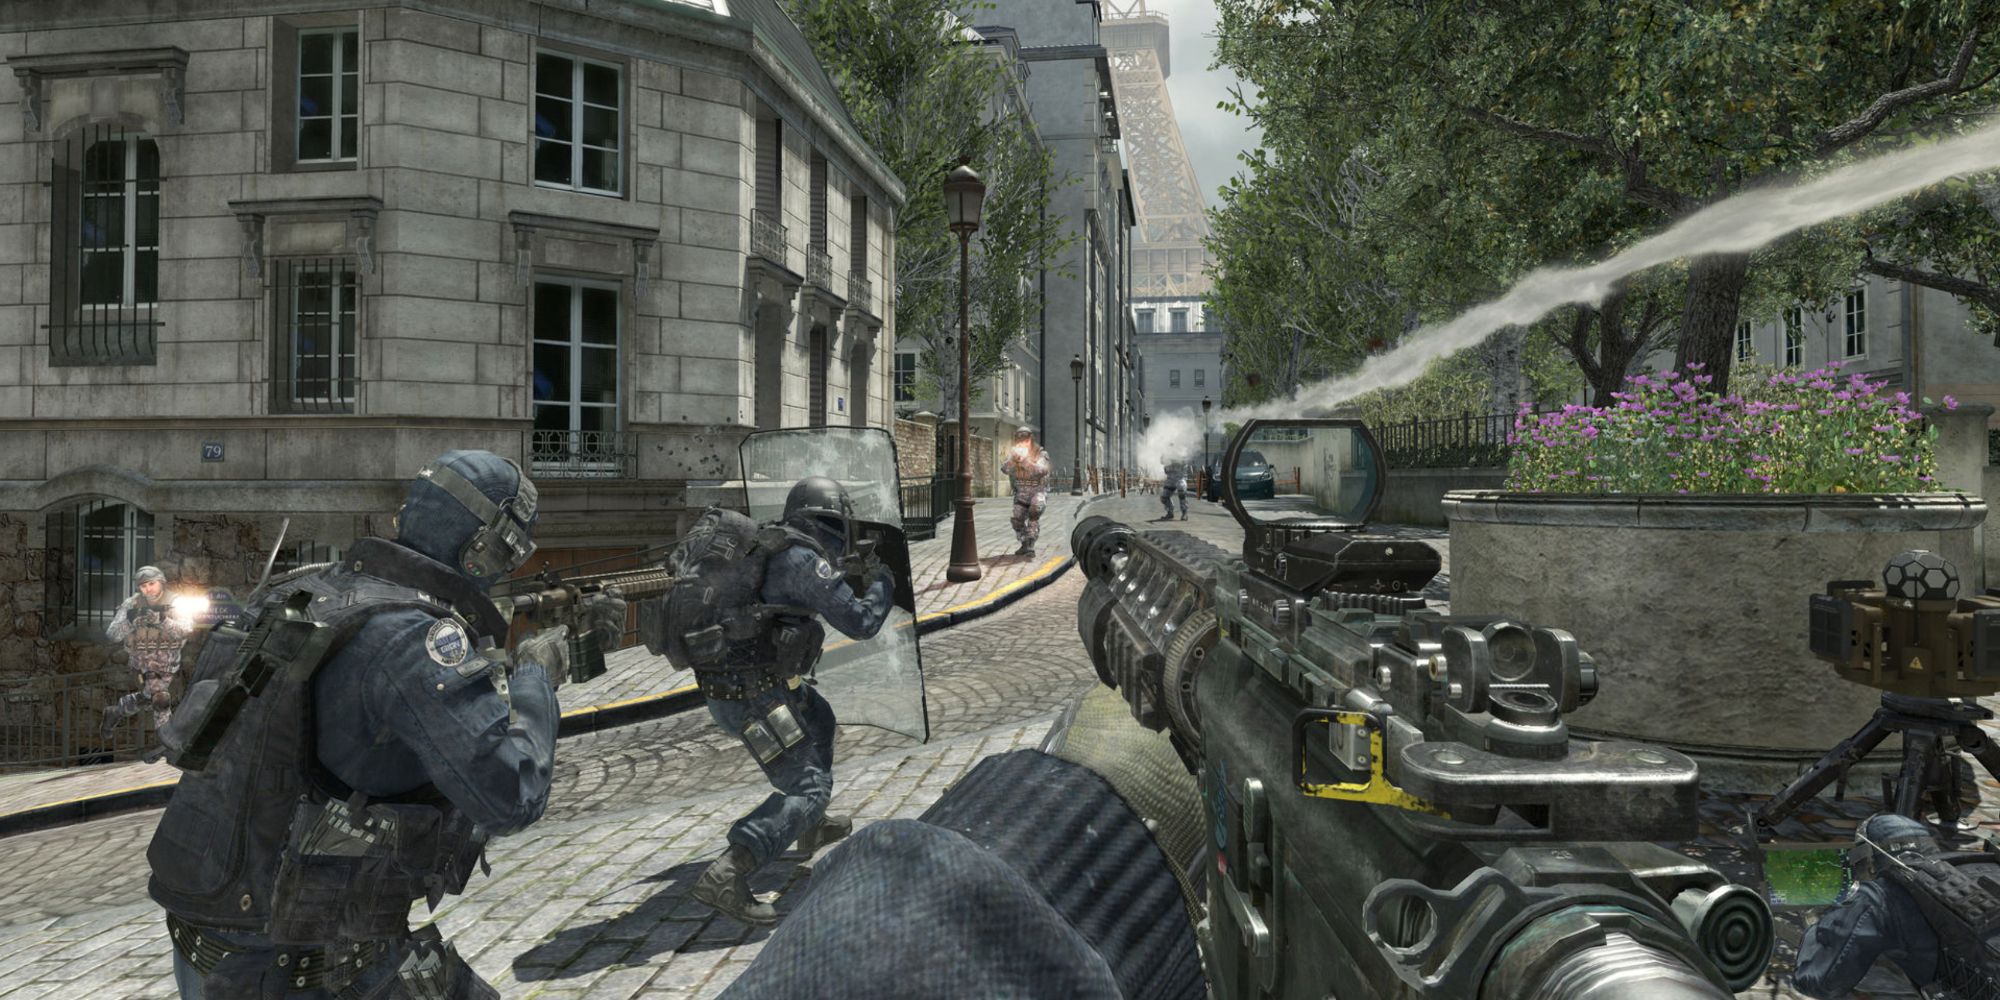 Promotional Image for Call of Duty: Modern Warfare 3